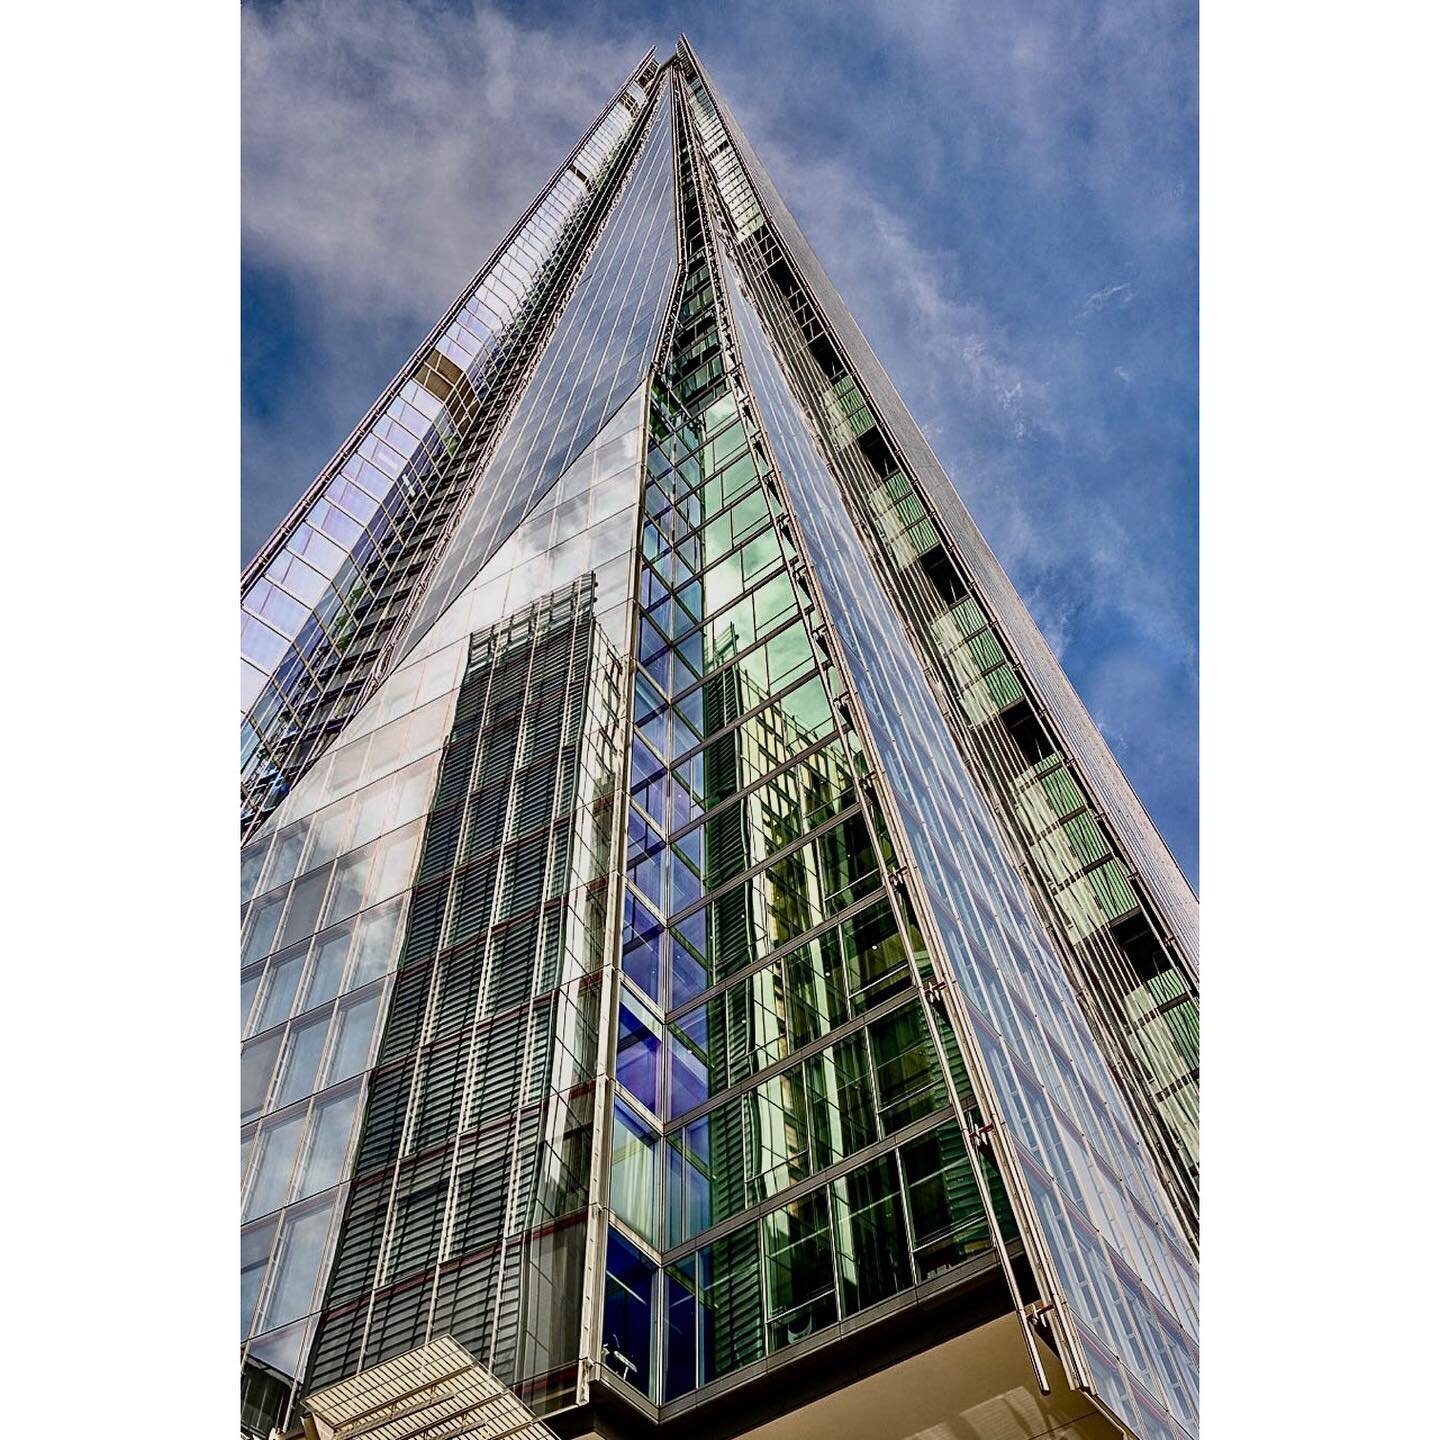 Reflections on The Shard,  a 72-storey skyscraper in Southwark, London designed by architect Renzo Piano as a spire-like sculpture emerging from the Thames.